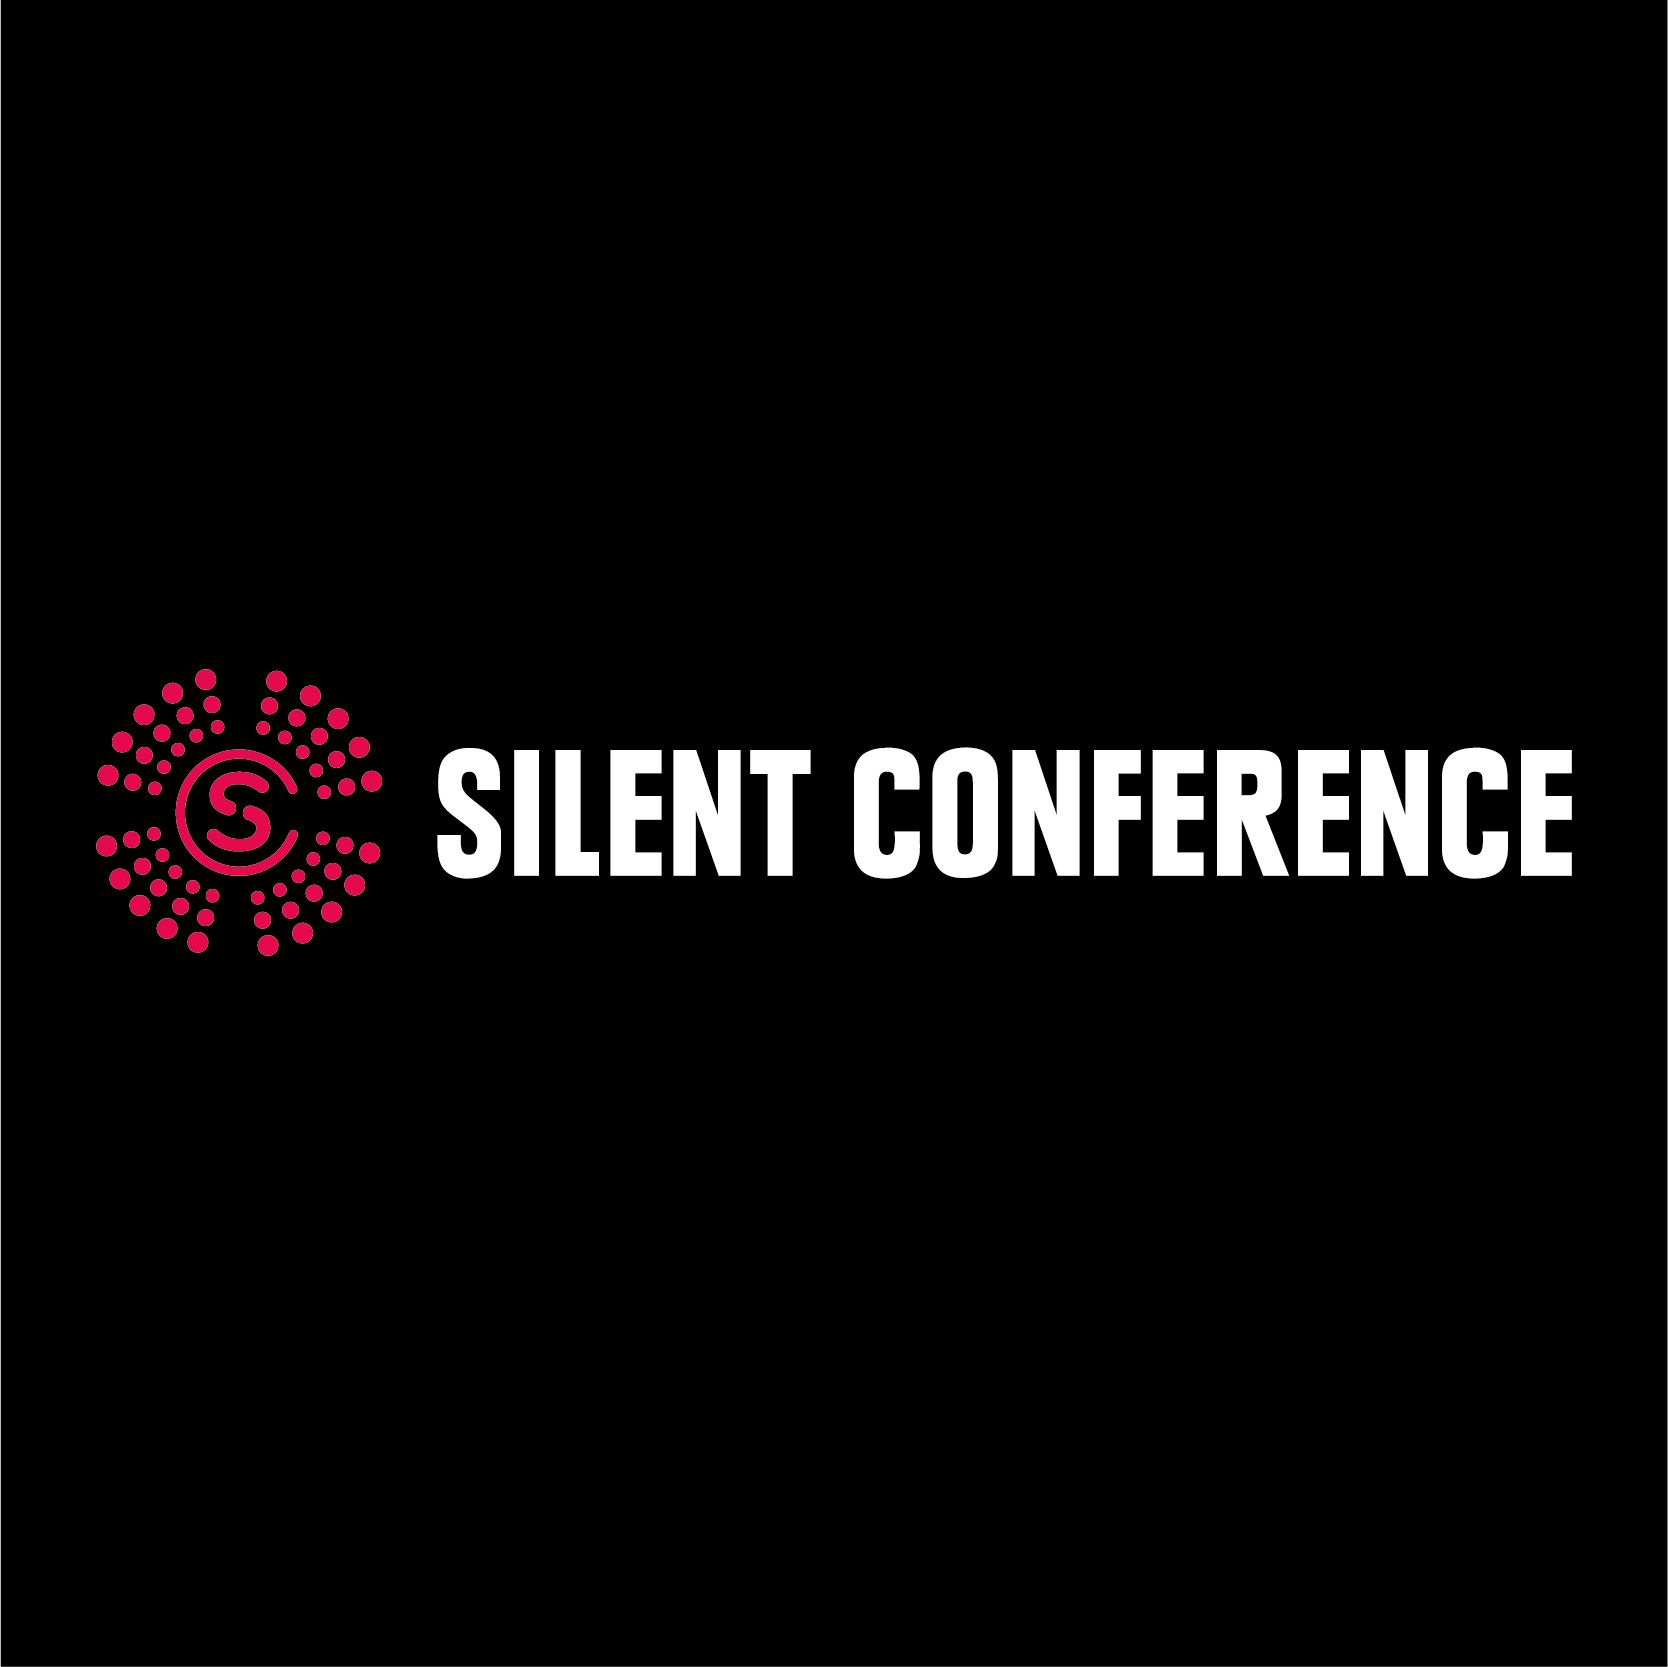 Silent Conference